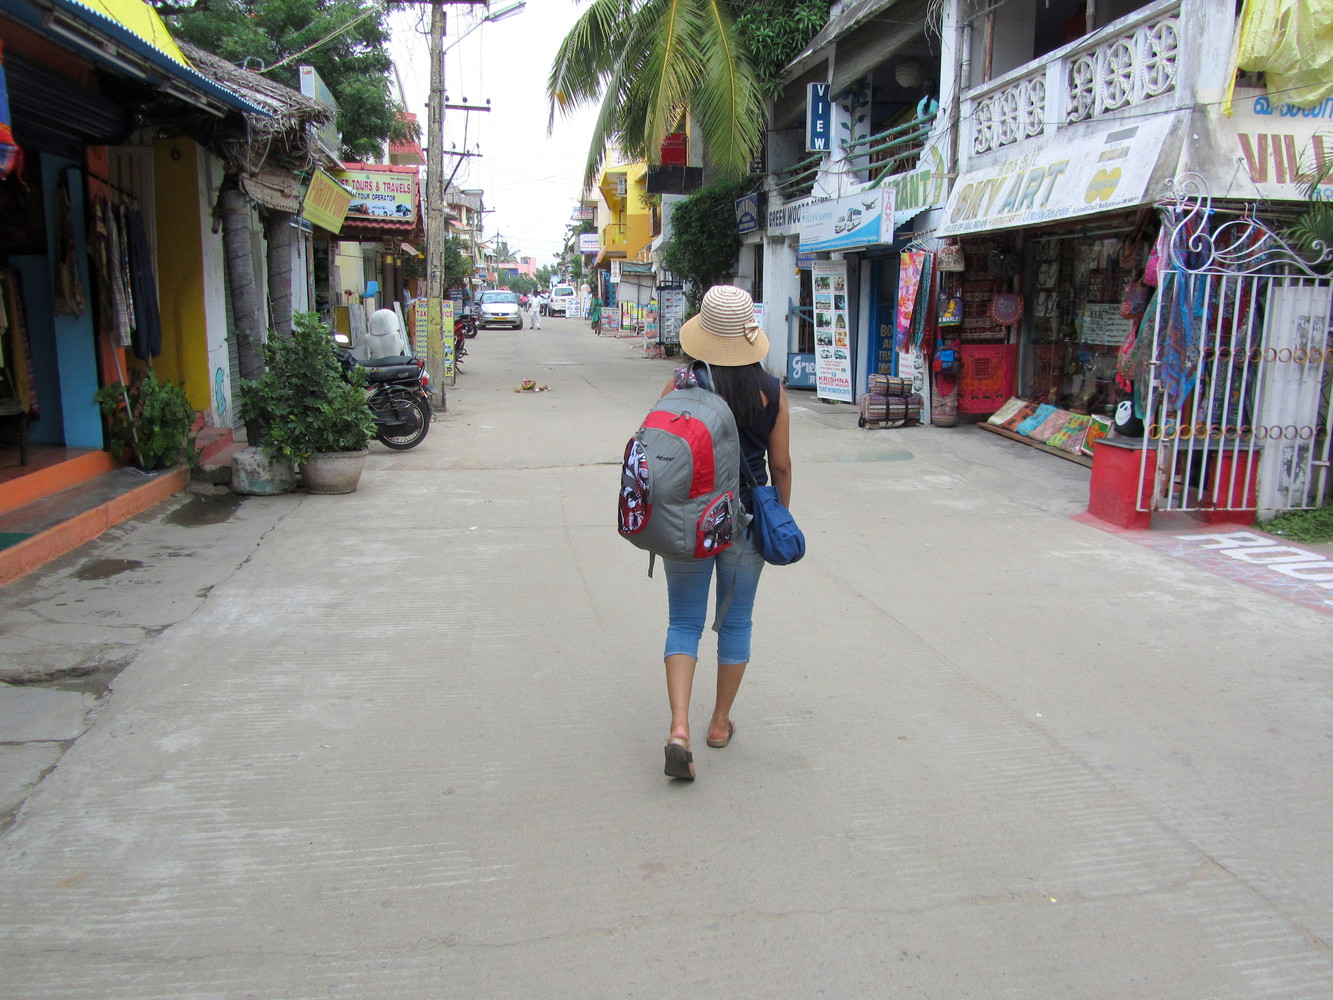 A female traveller with a hat, a backpack, and a purse walking on a street with houses and shops on both sides